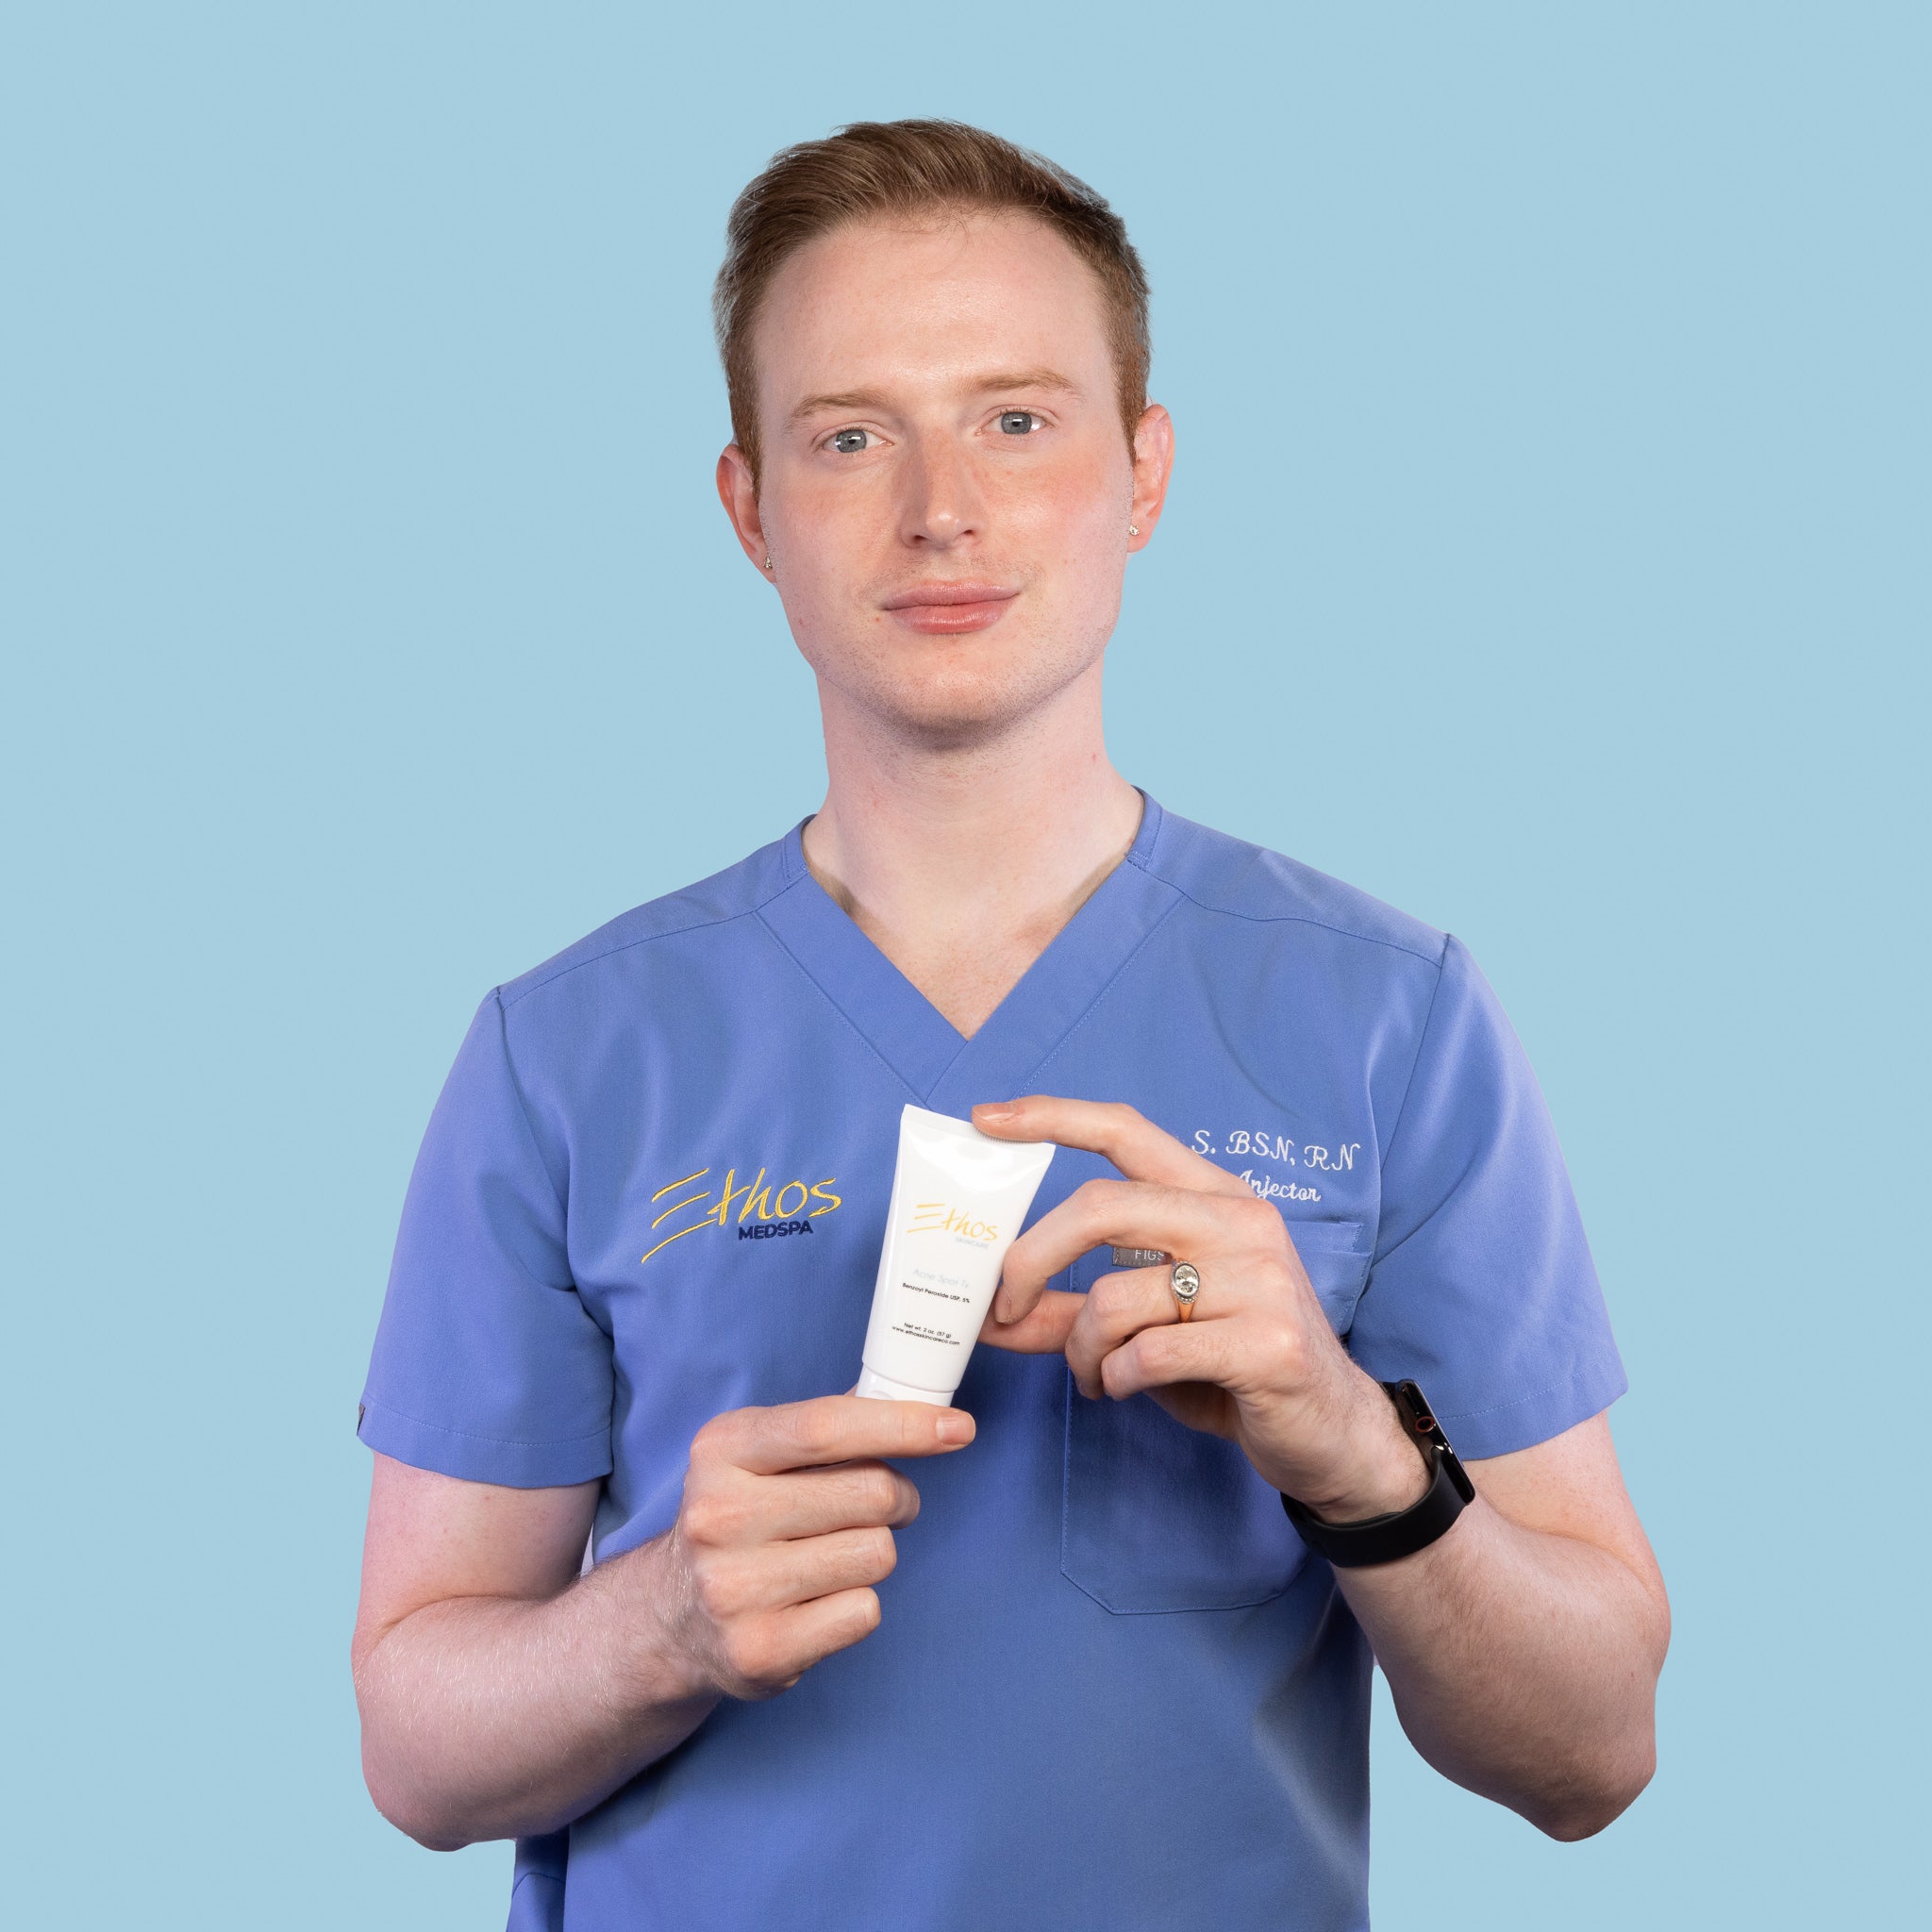 Acne Spot Treatment product explained by Aeron Sheffield, BSN, RN